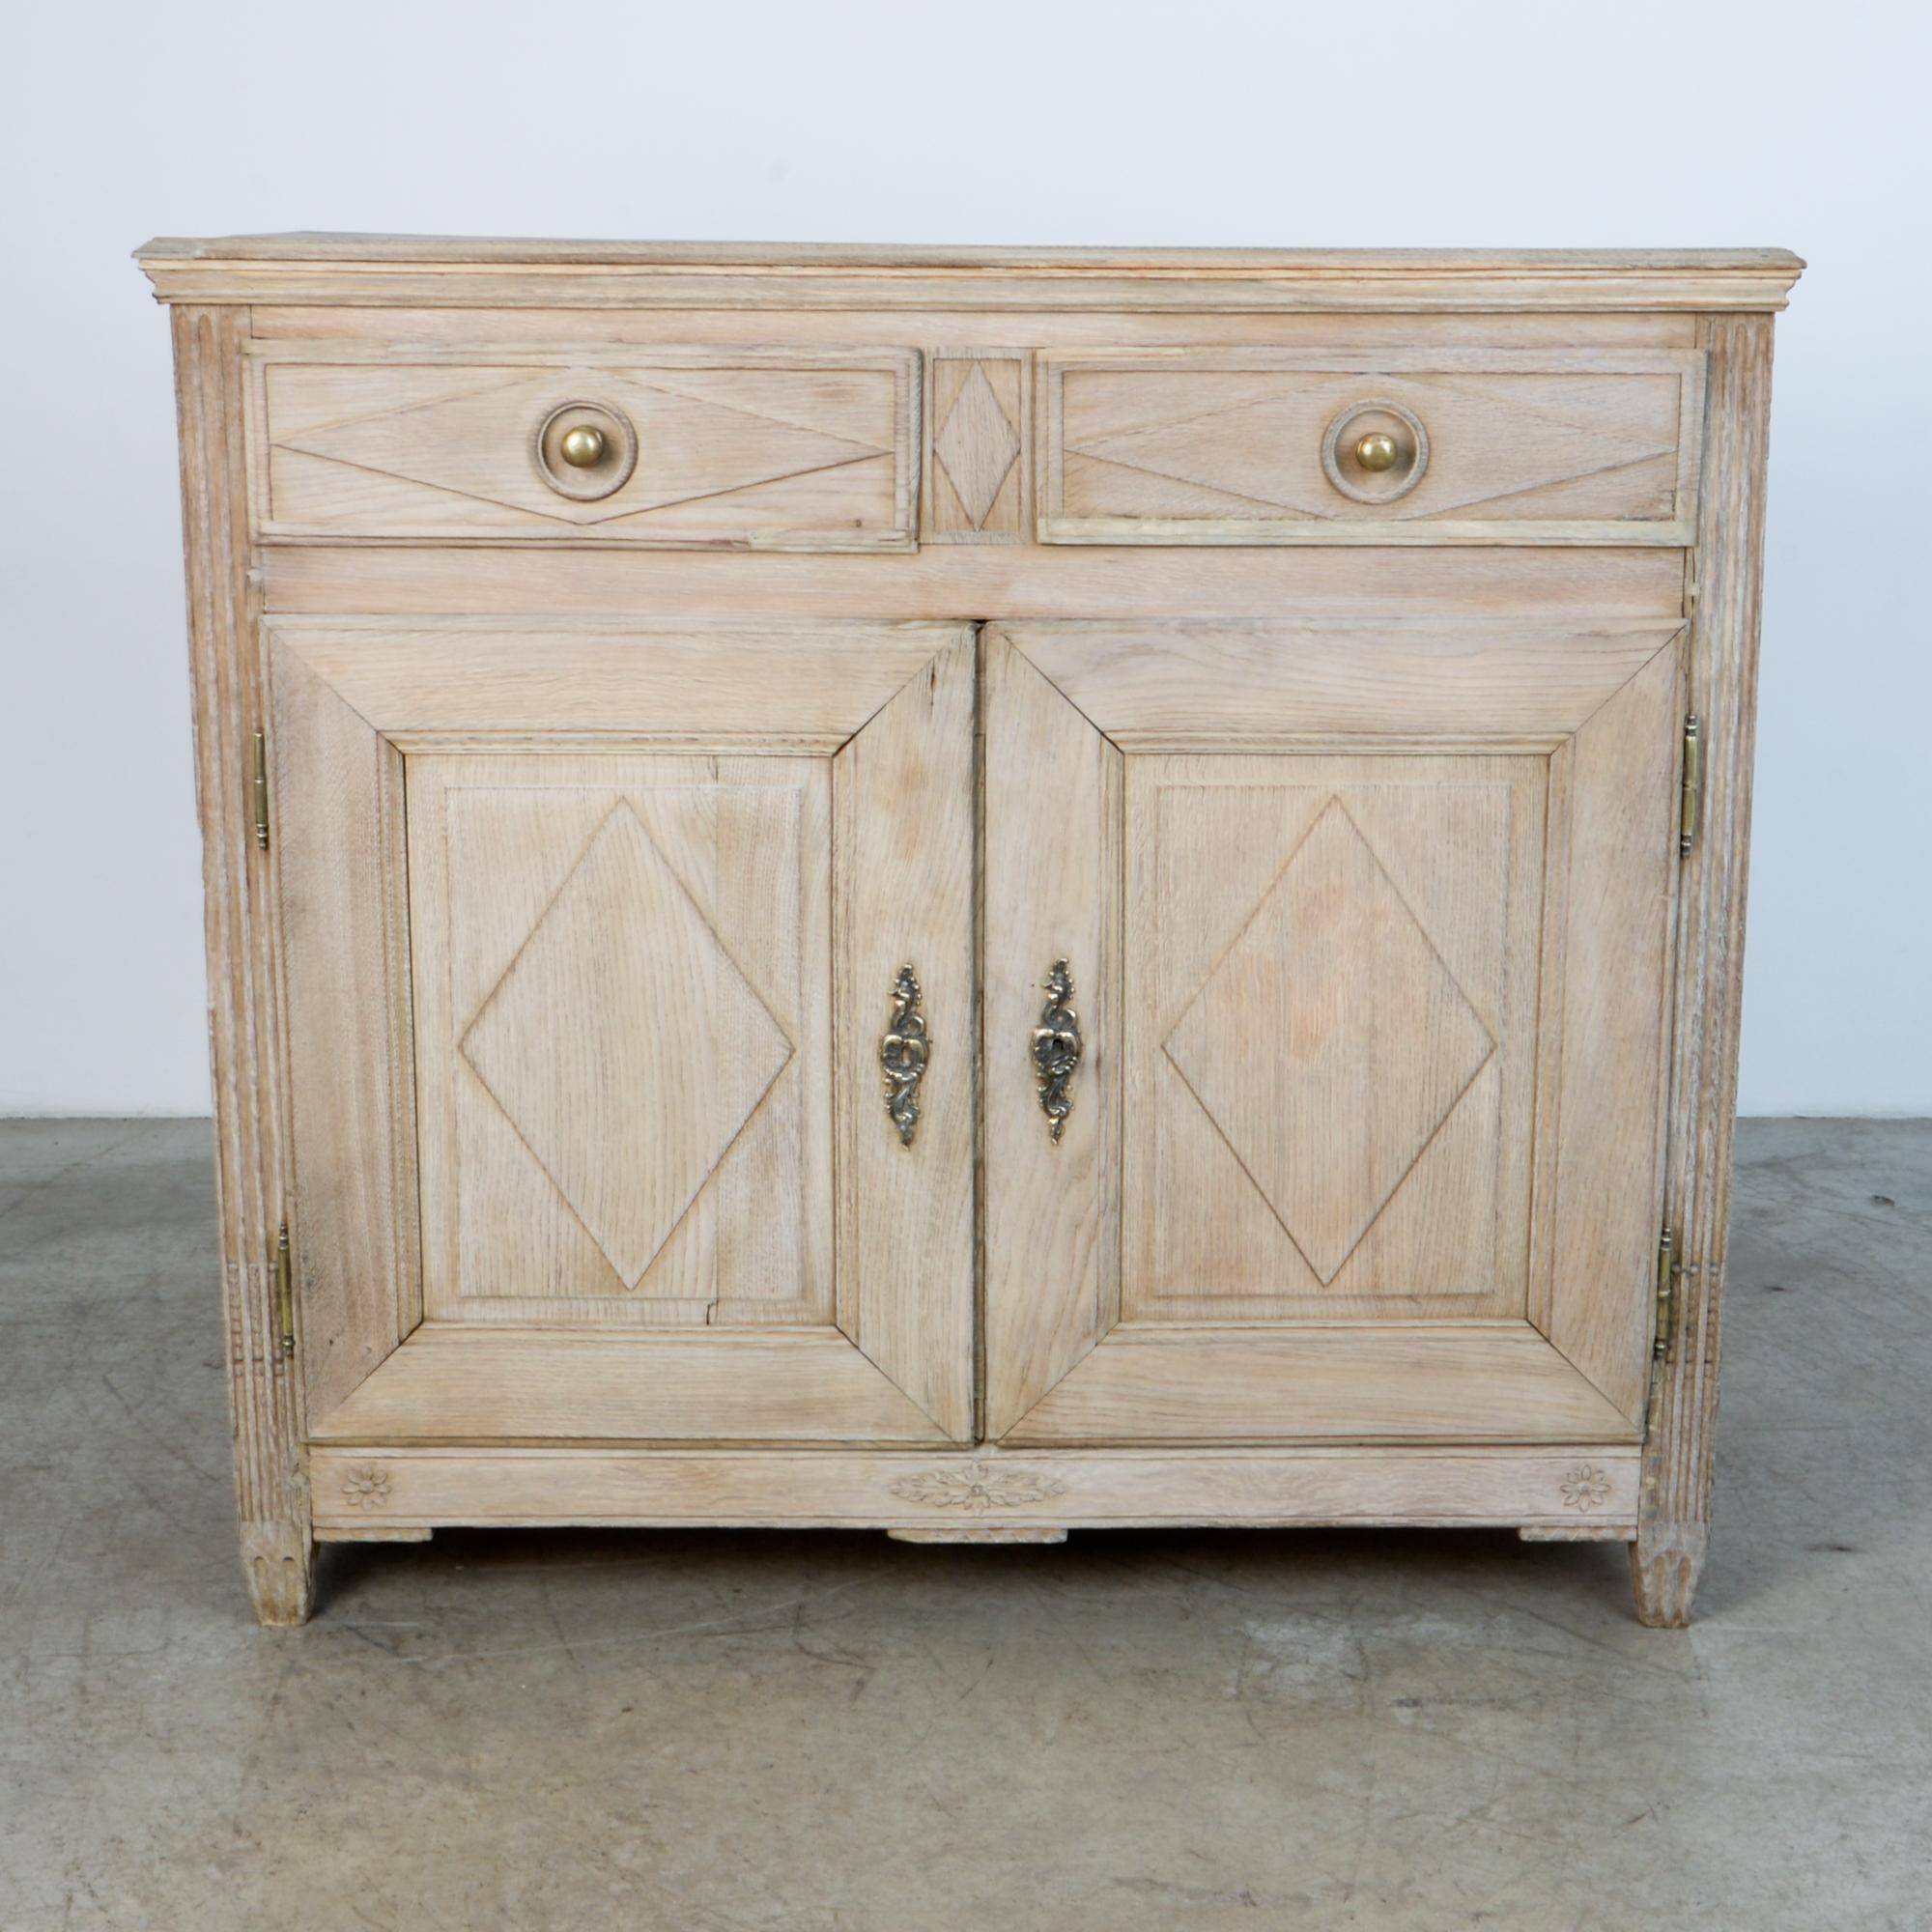 From circa 1860, a two-door and drawer cabinet in oak. A distinctly country style approach typifies the casual yet refined aesthetic of the French countryside. A beautiful rustic finish shows evidence of wear. The seasoning of time enhances the